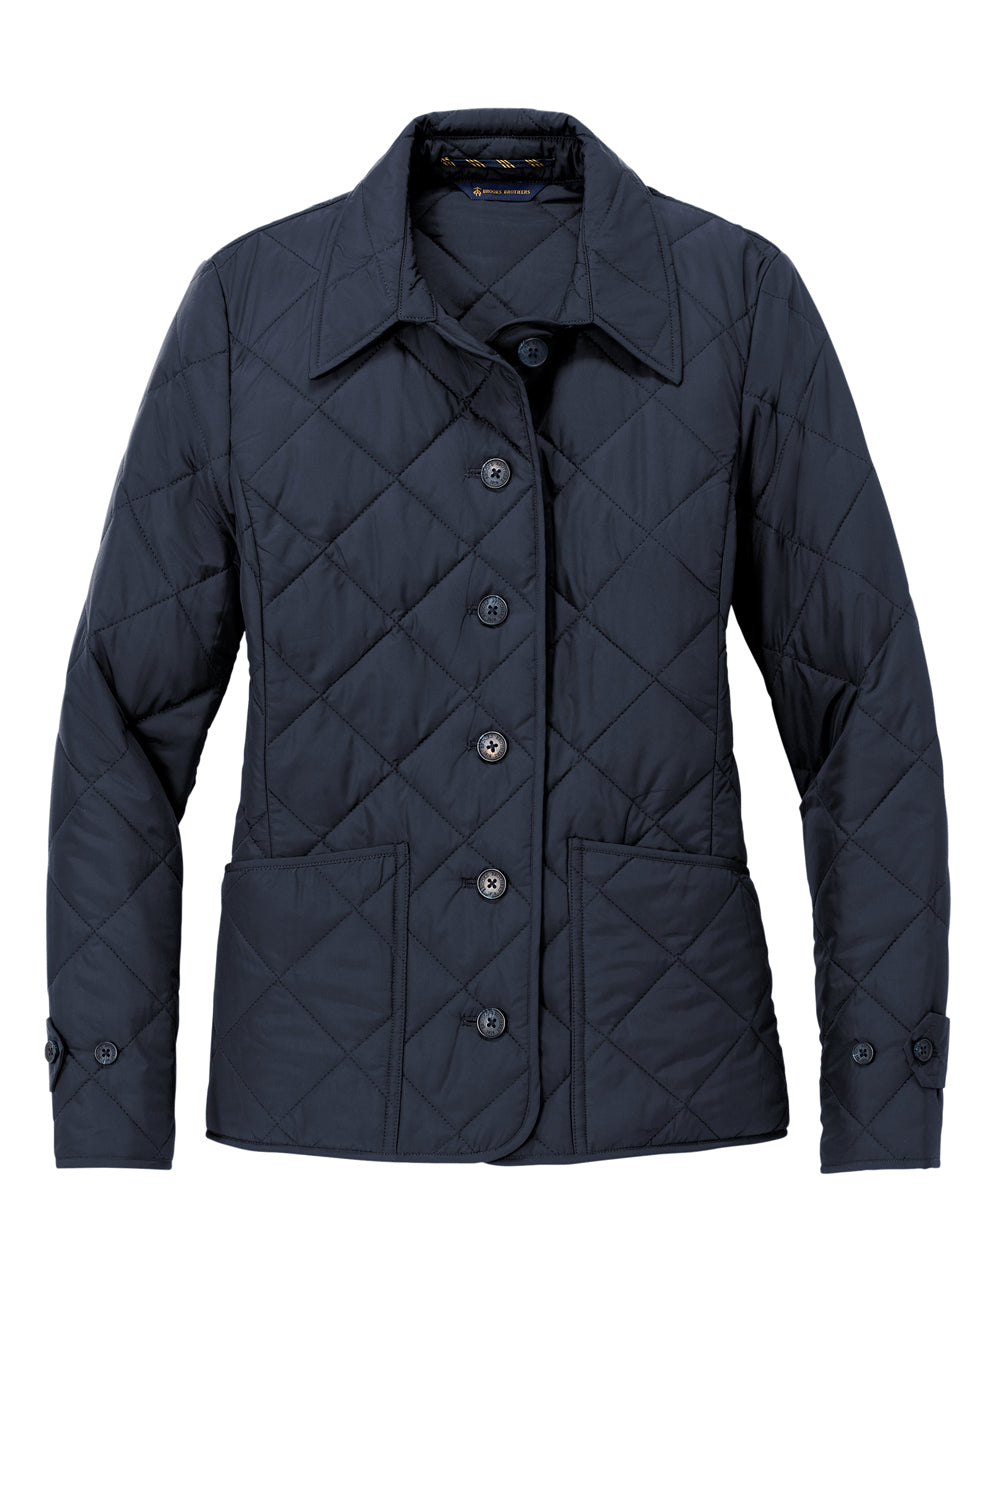 Brooks Brothers Womens Water Resistant Quilted Full Zip Jacket Night Navy Blue Flat Front